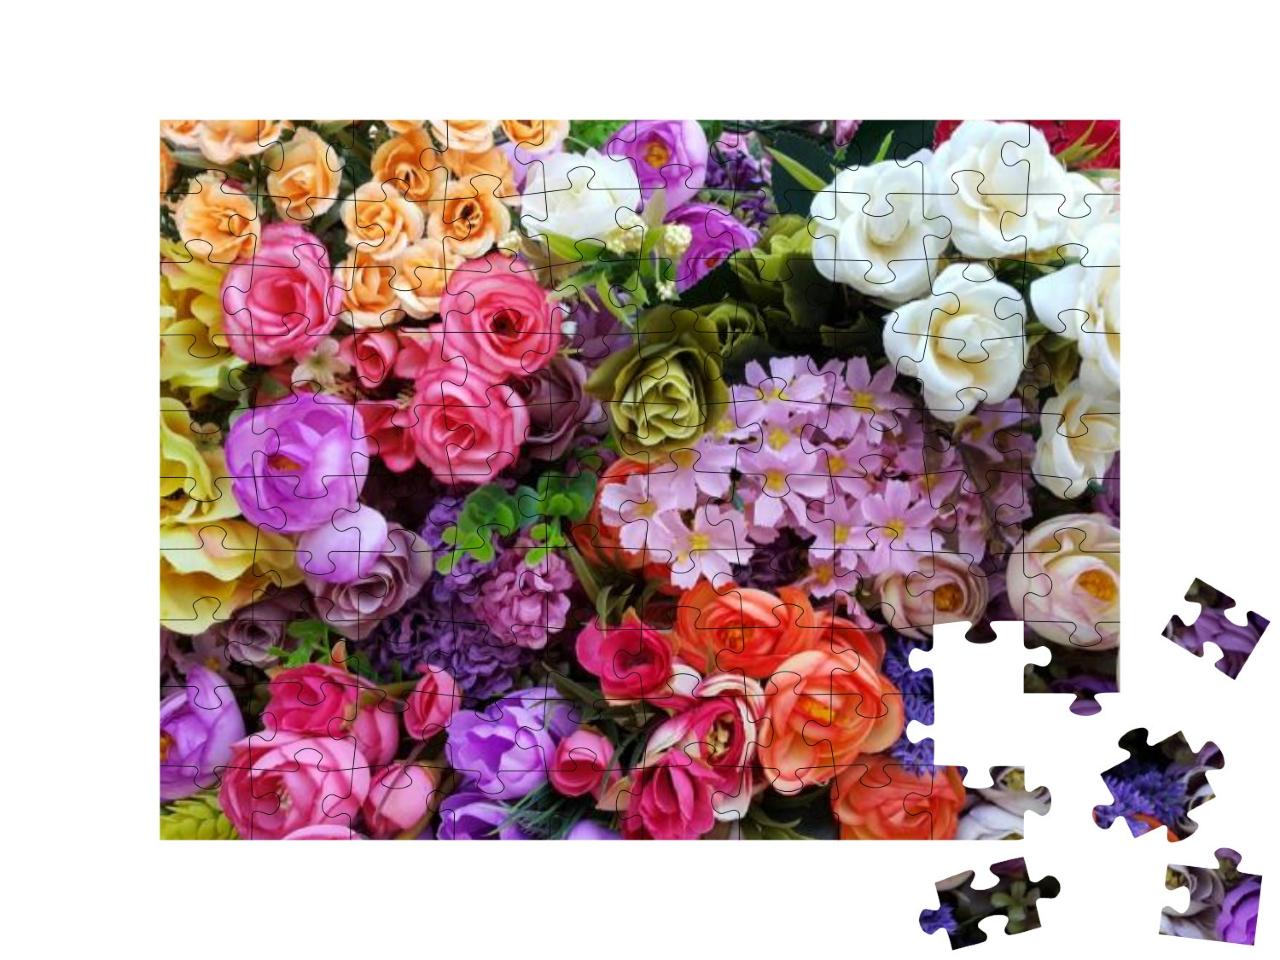 Irregularly Placed Flowers in Various Colors... Jigsaw Puzzle with 100 pieces